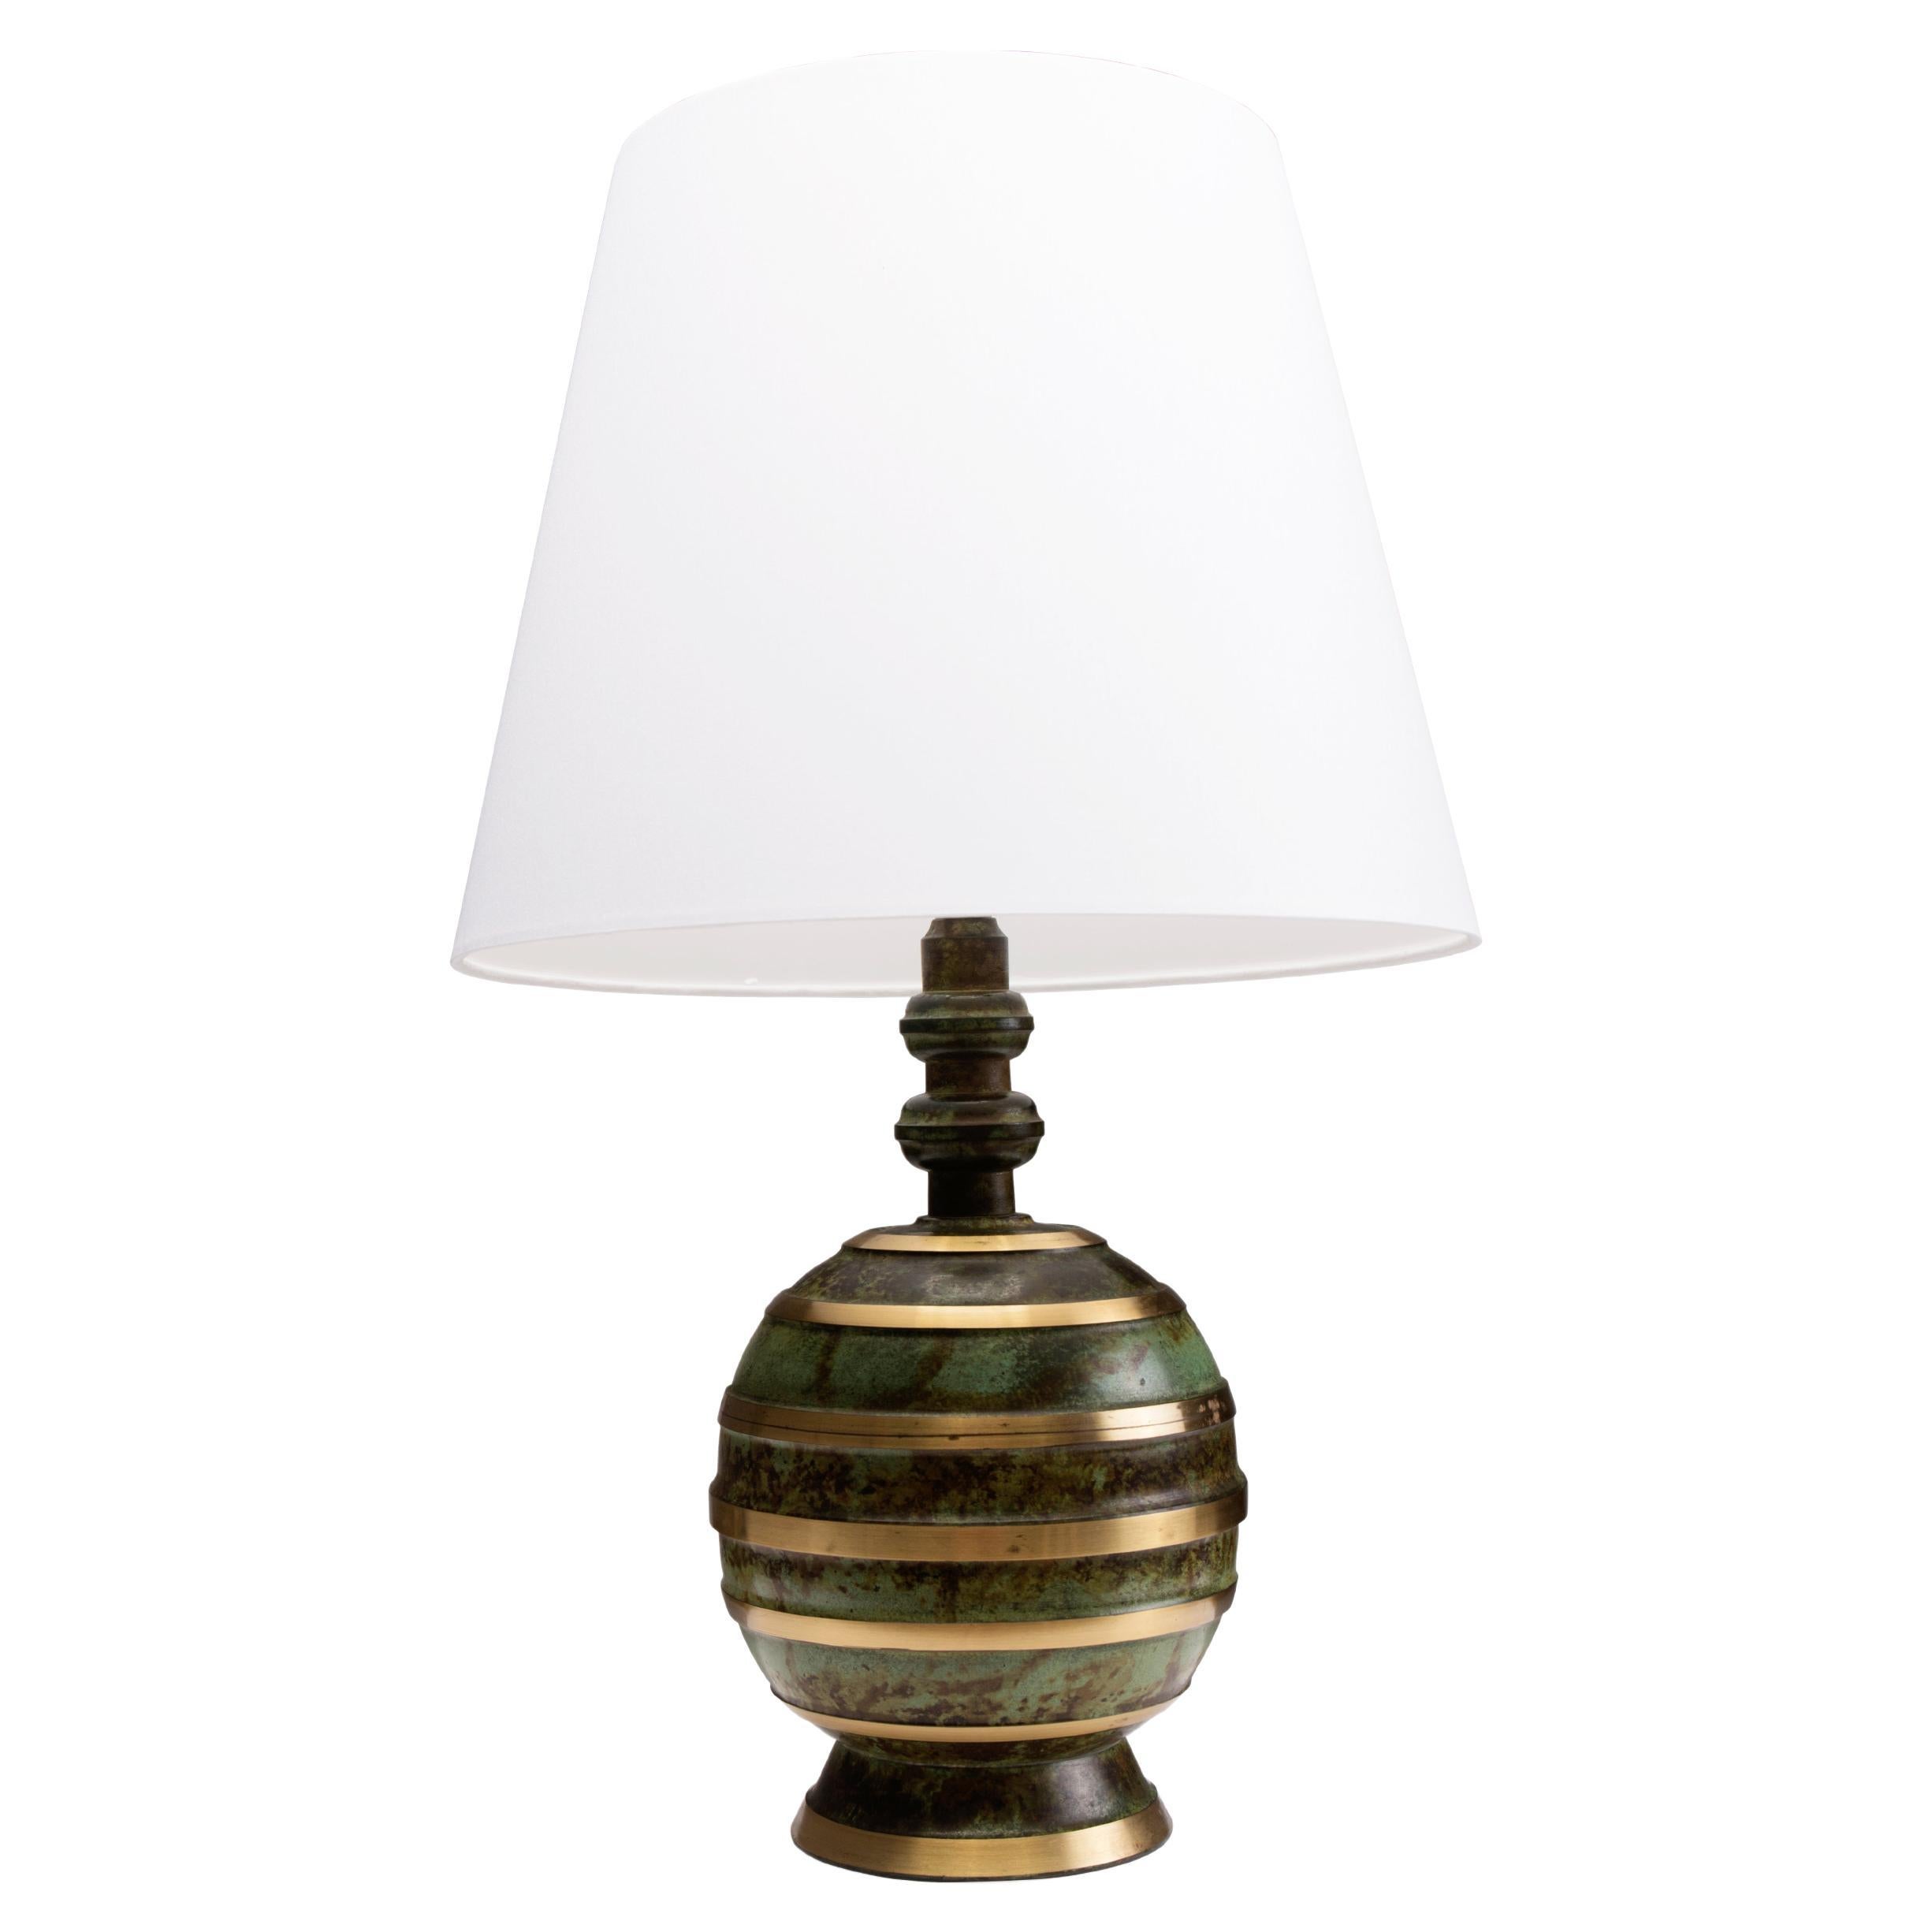 Swedish art deco table lamp with patinated and polished bronze